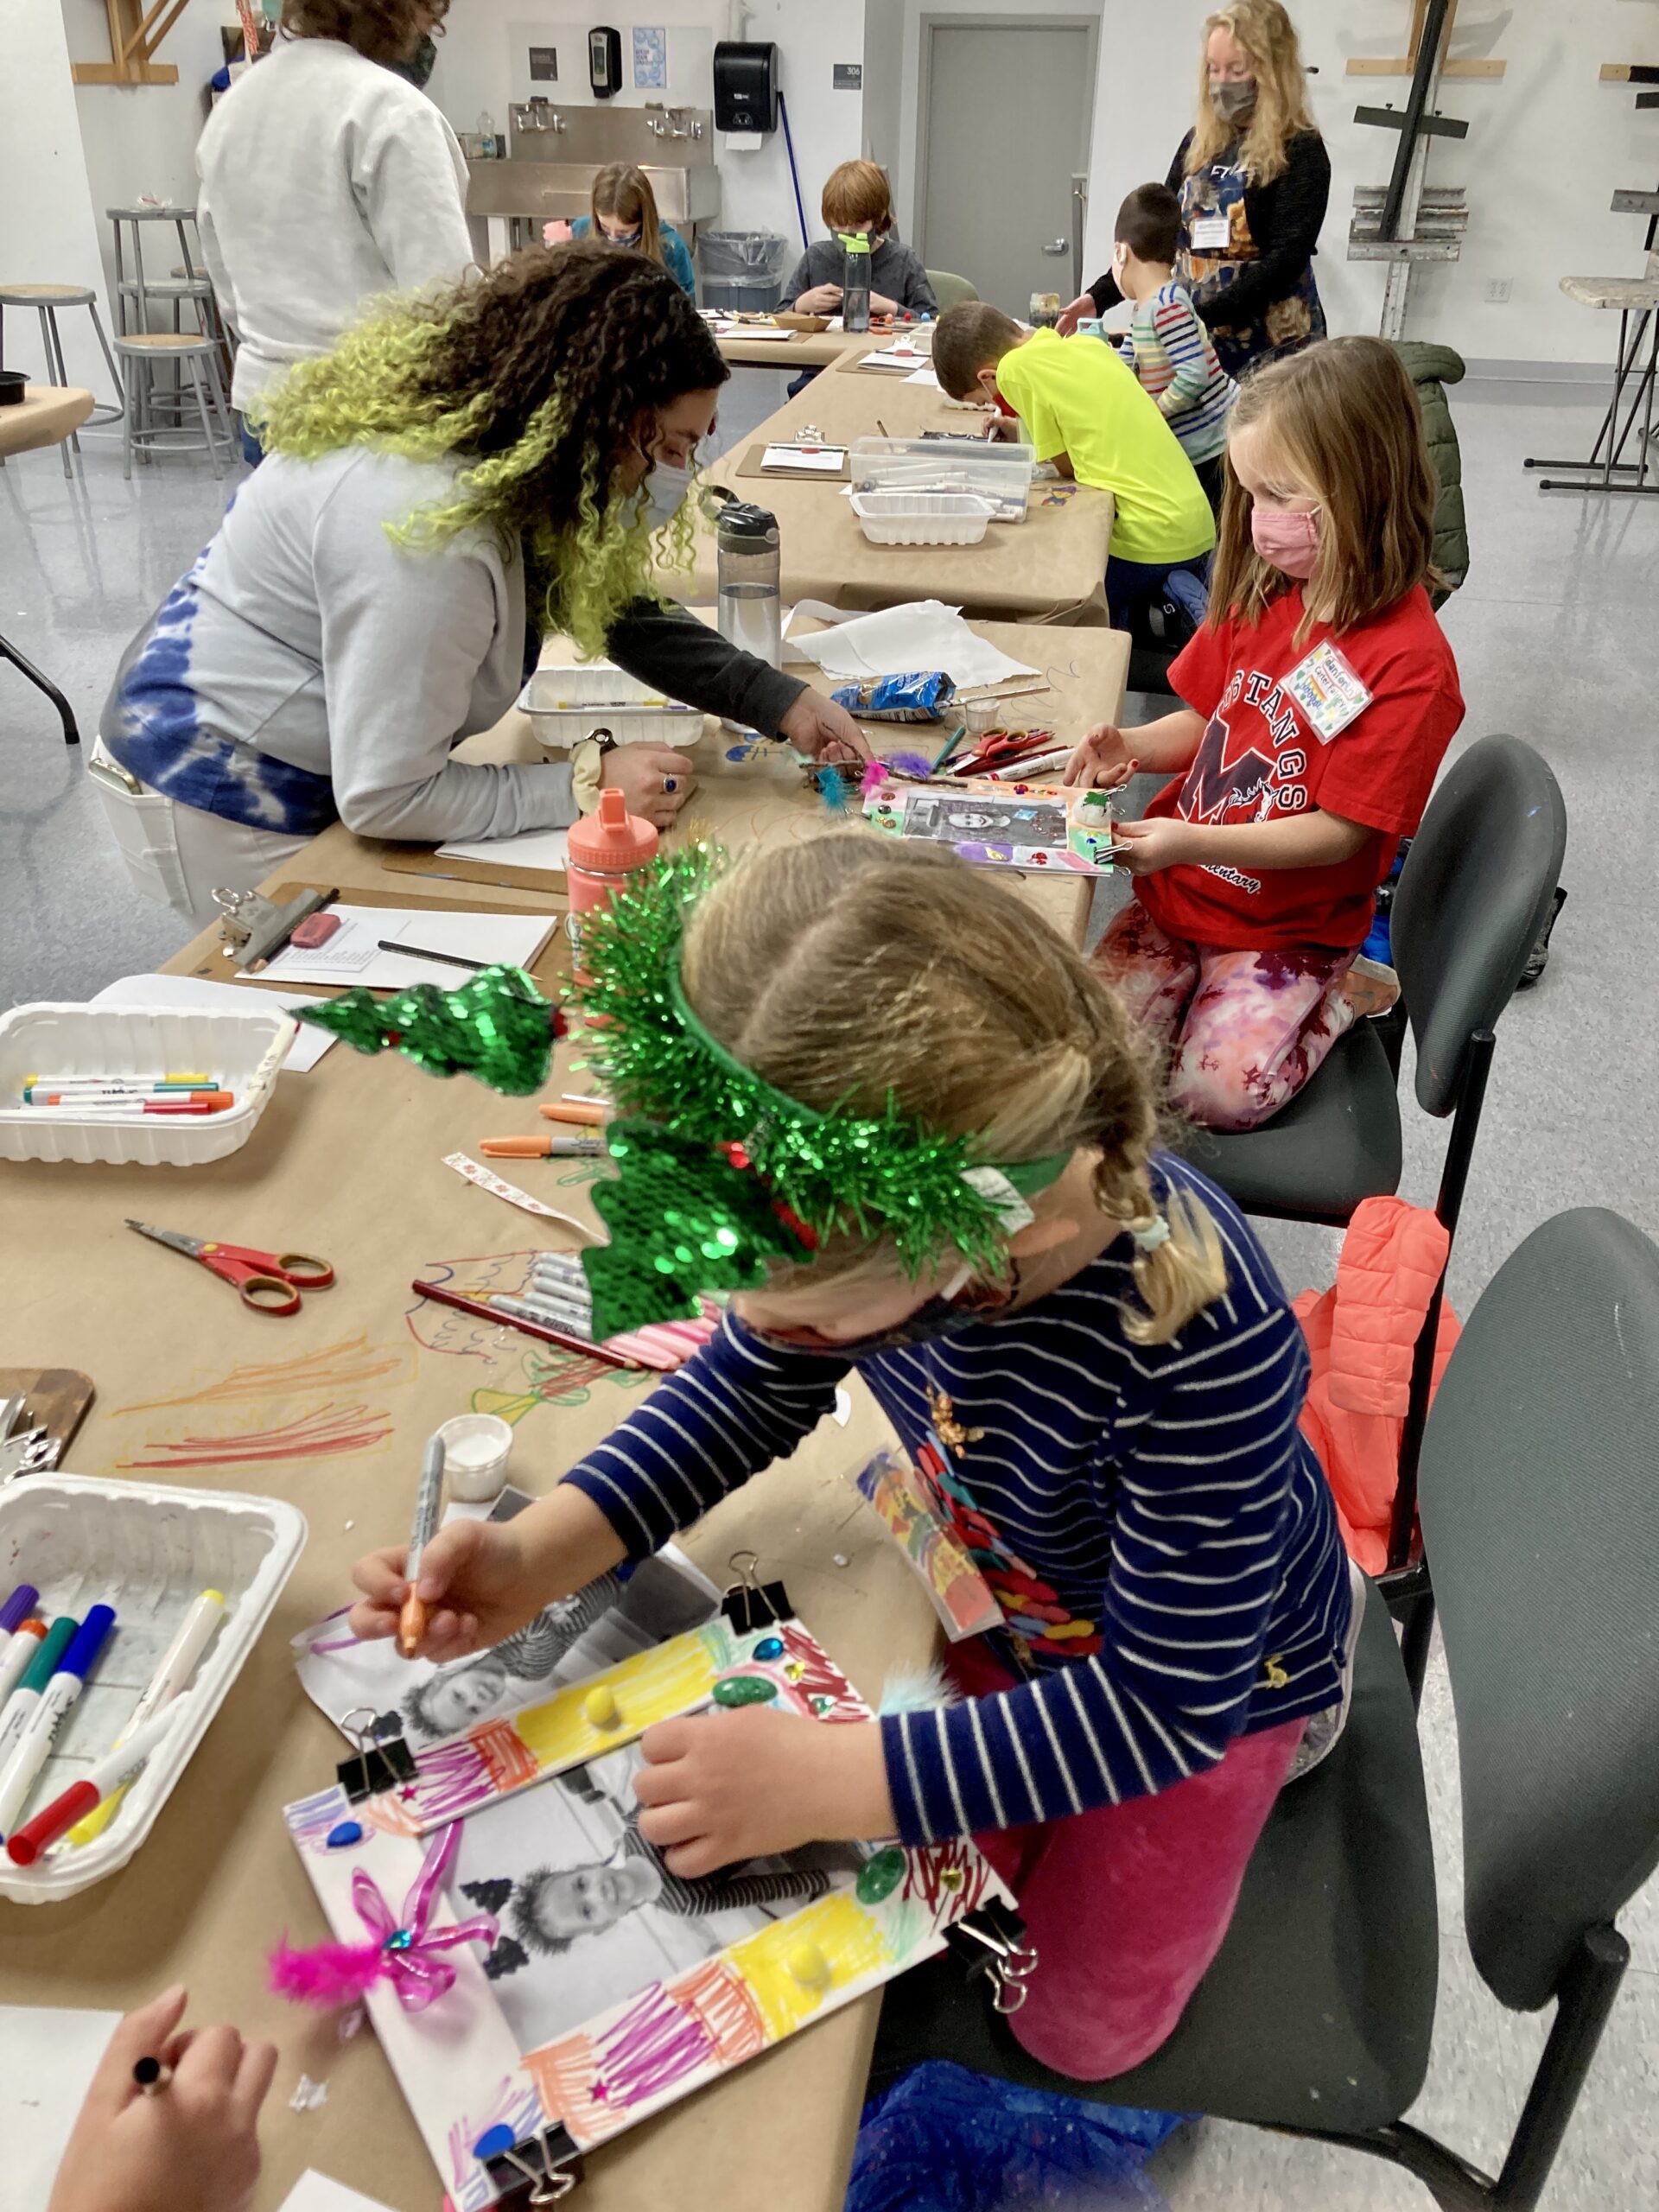 Photograph of young kids at a long table creating colorful cardboard picture frames.